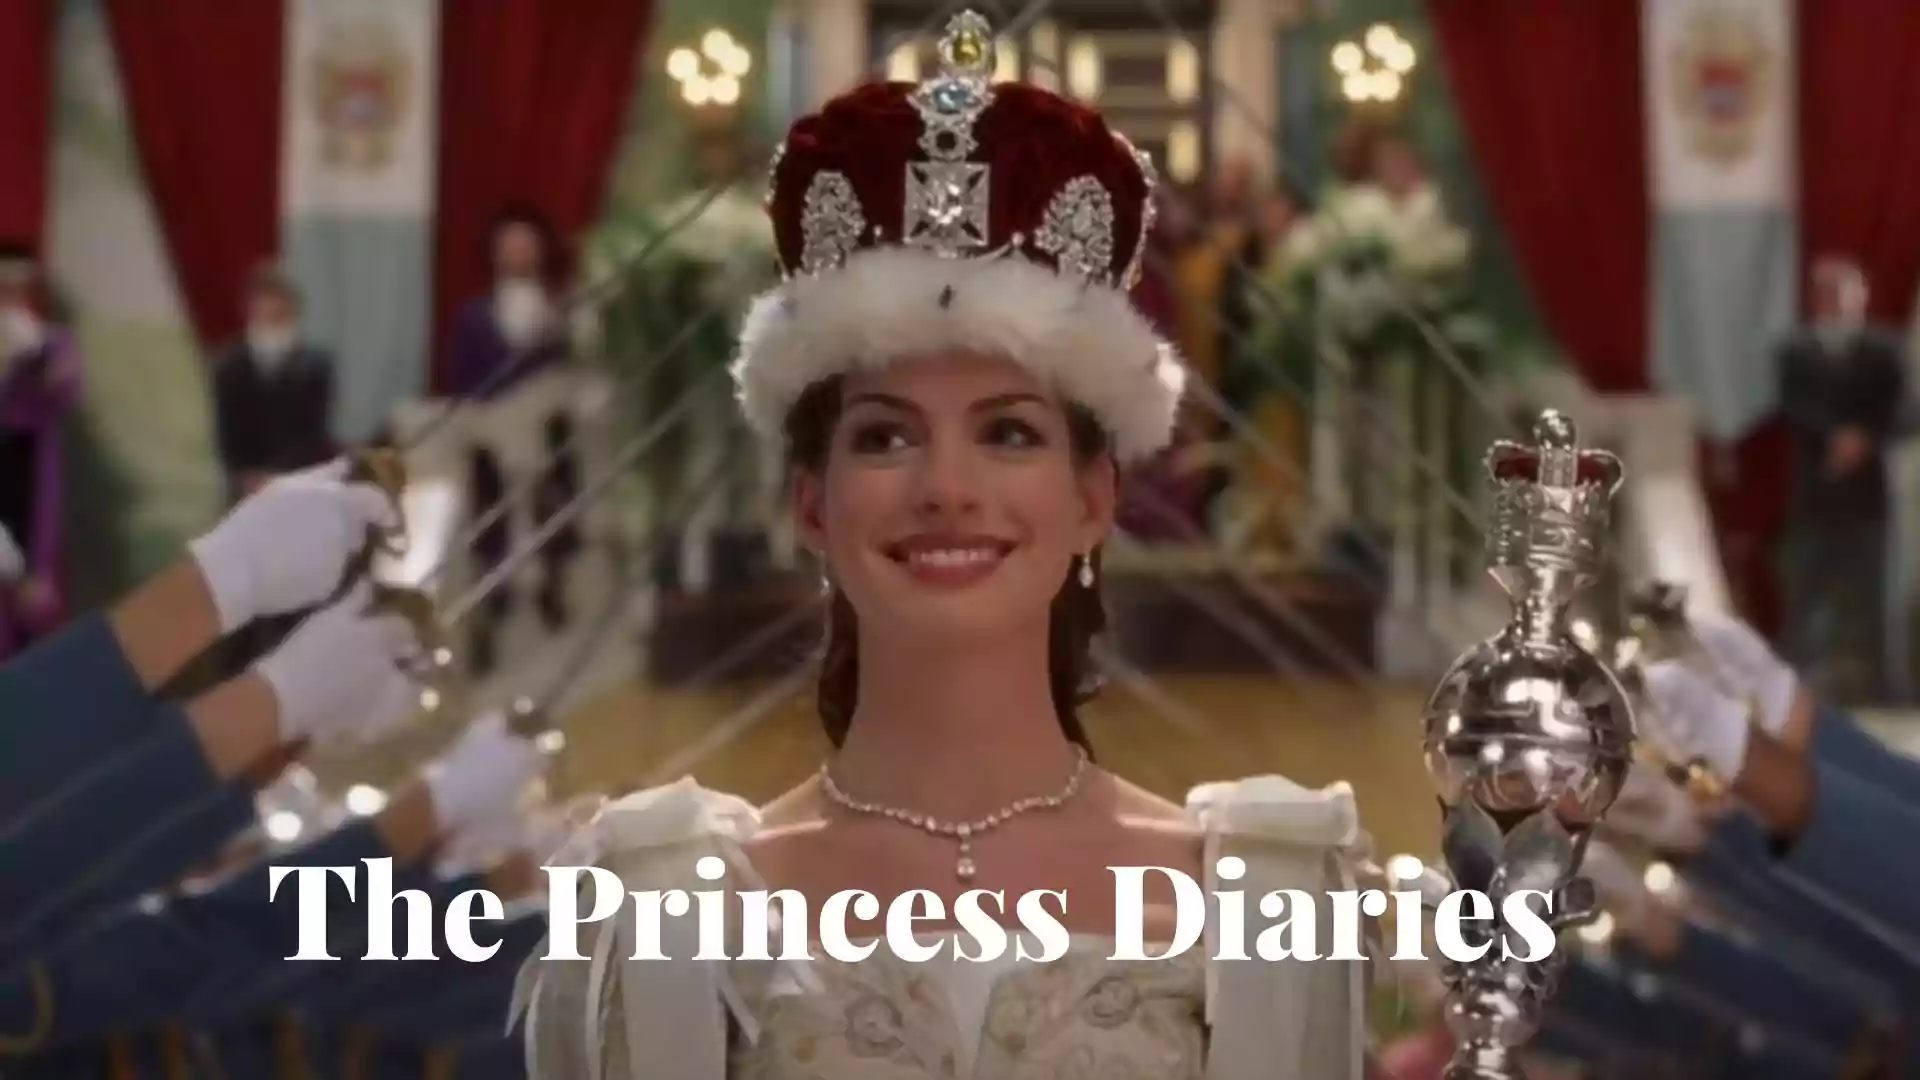 The Princess Diaries Parents Guide and Age Rating